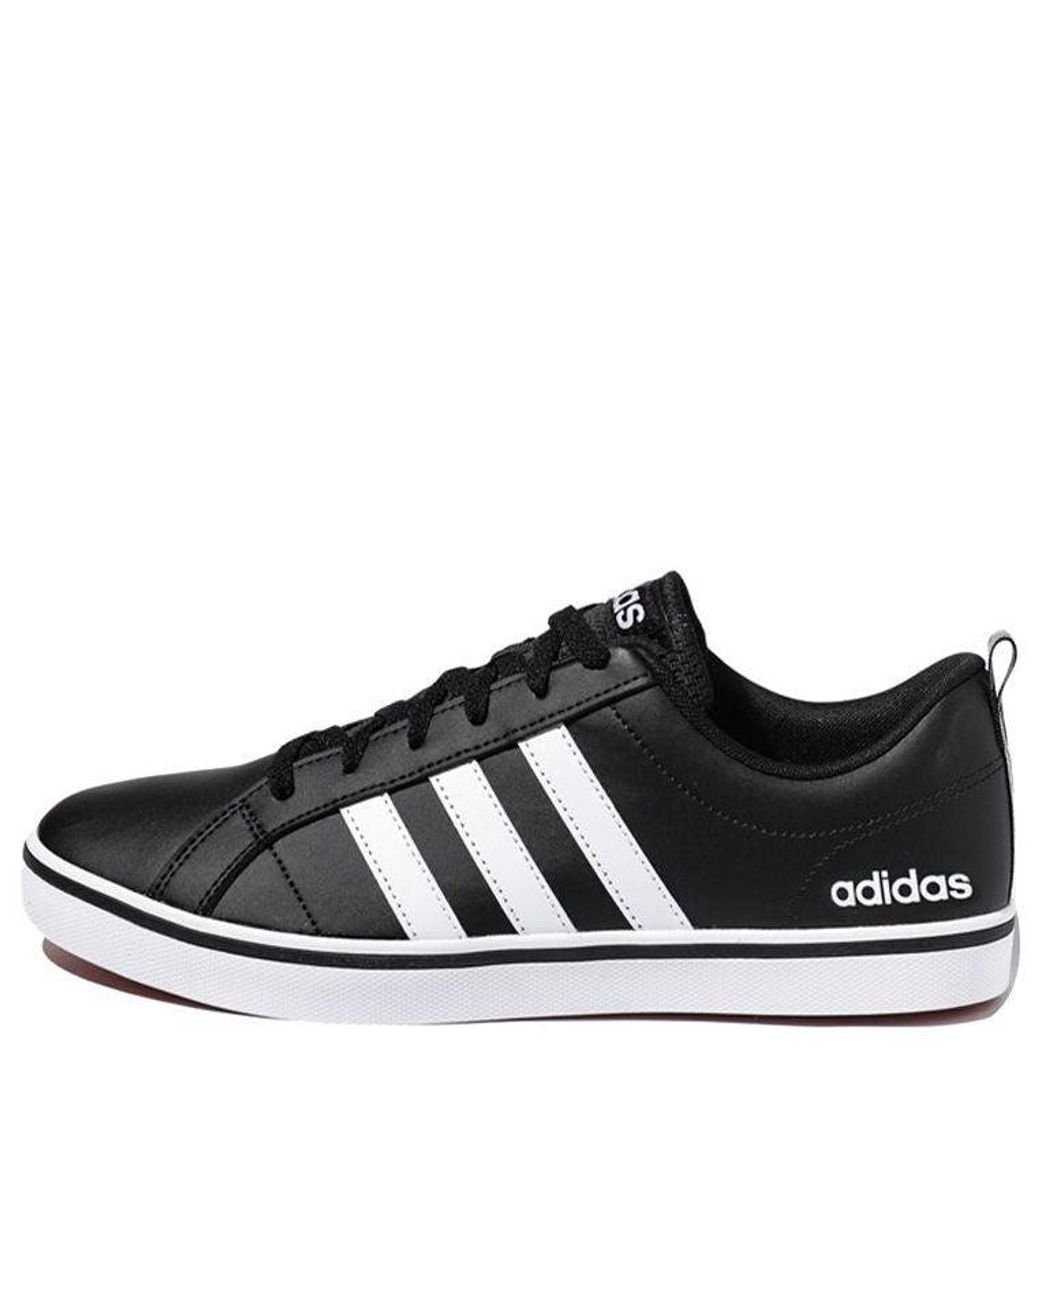 Adidas Neo Adidas Vs Pace 'casual Black' for Men | Lyst